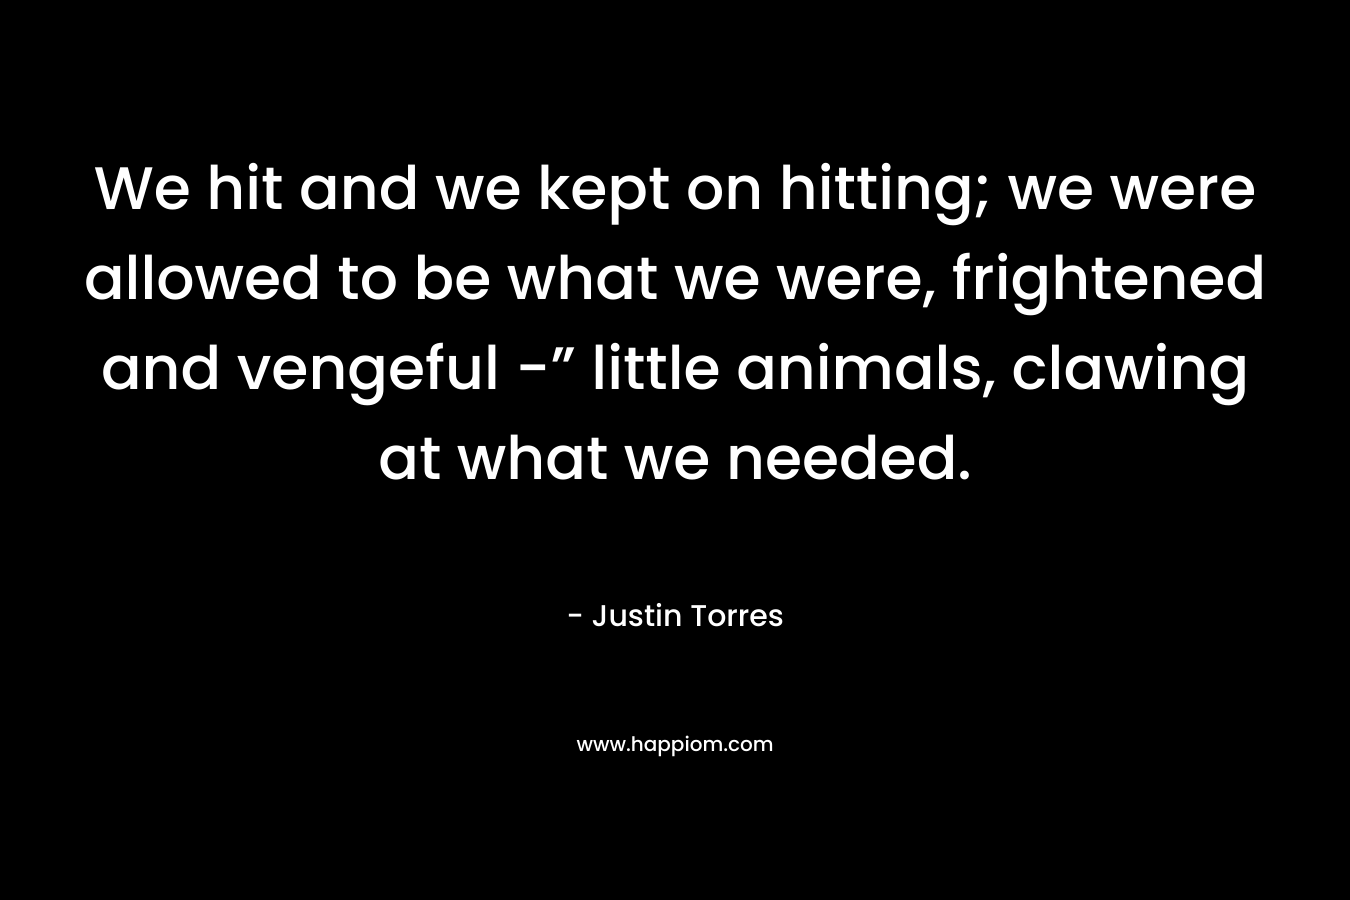 We hit and we kept on hitting; we were allowed to be what we were, frightened and vengeful -” little animals, clawing at what we needed. – Justin Torres